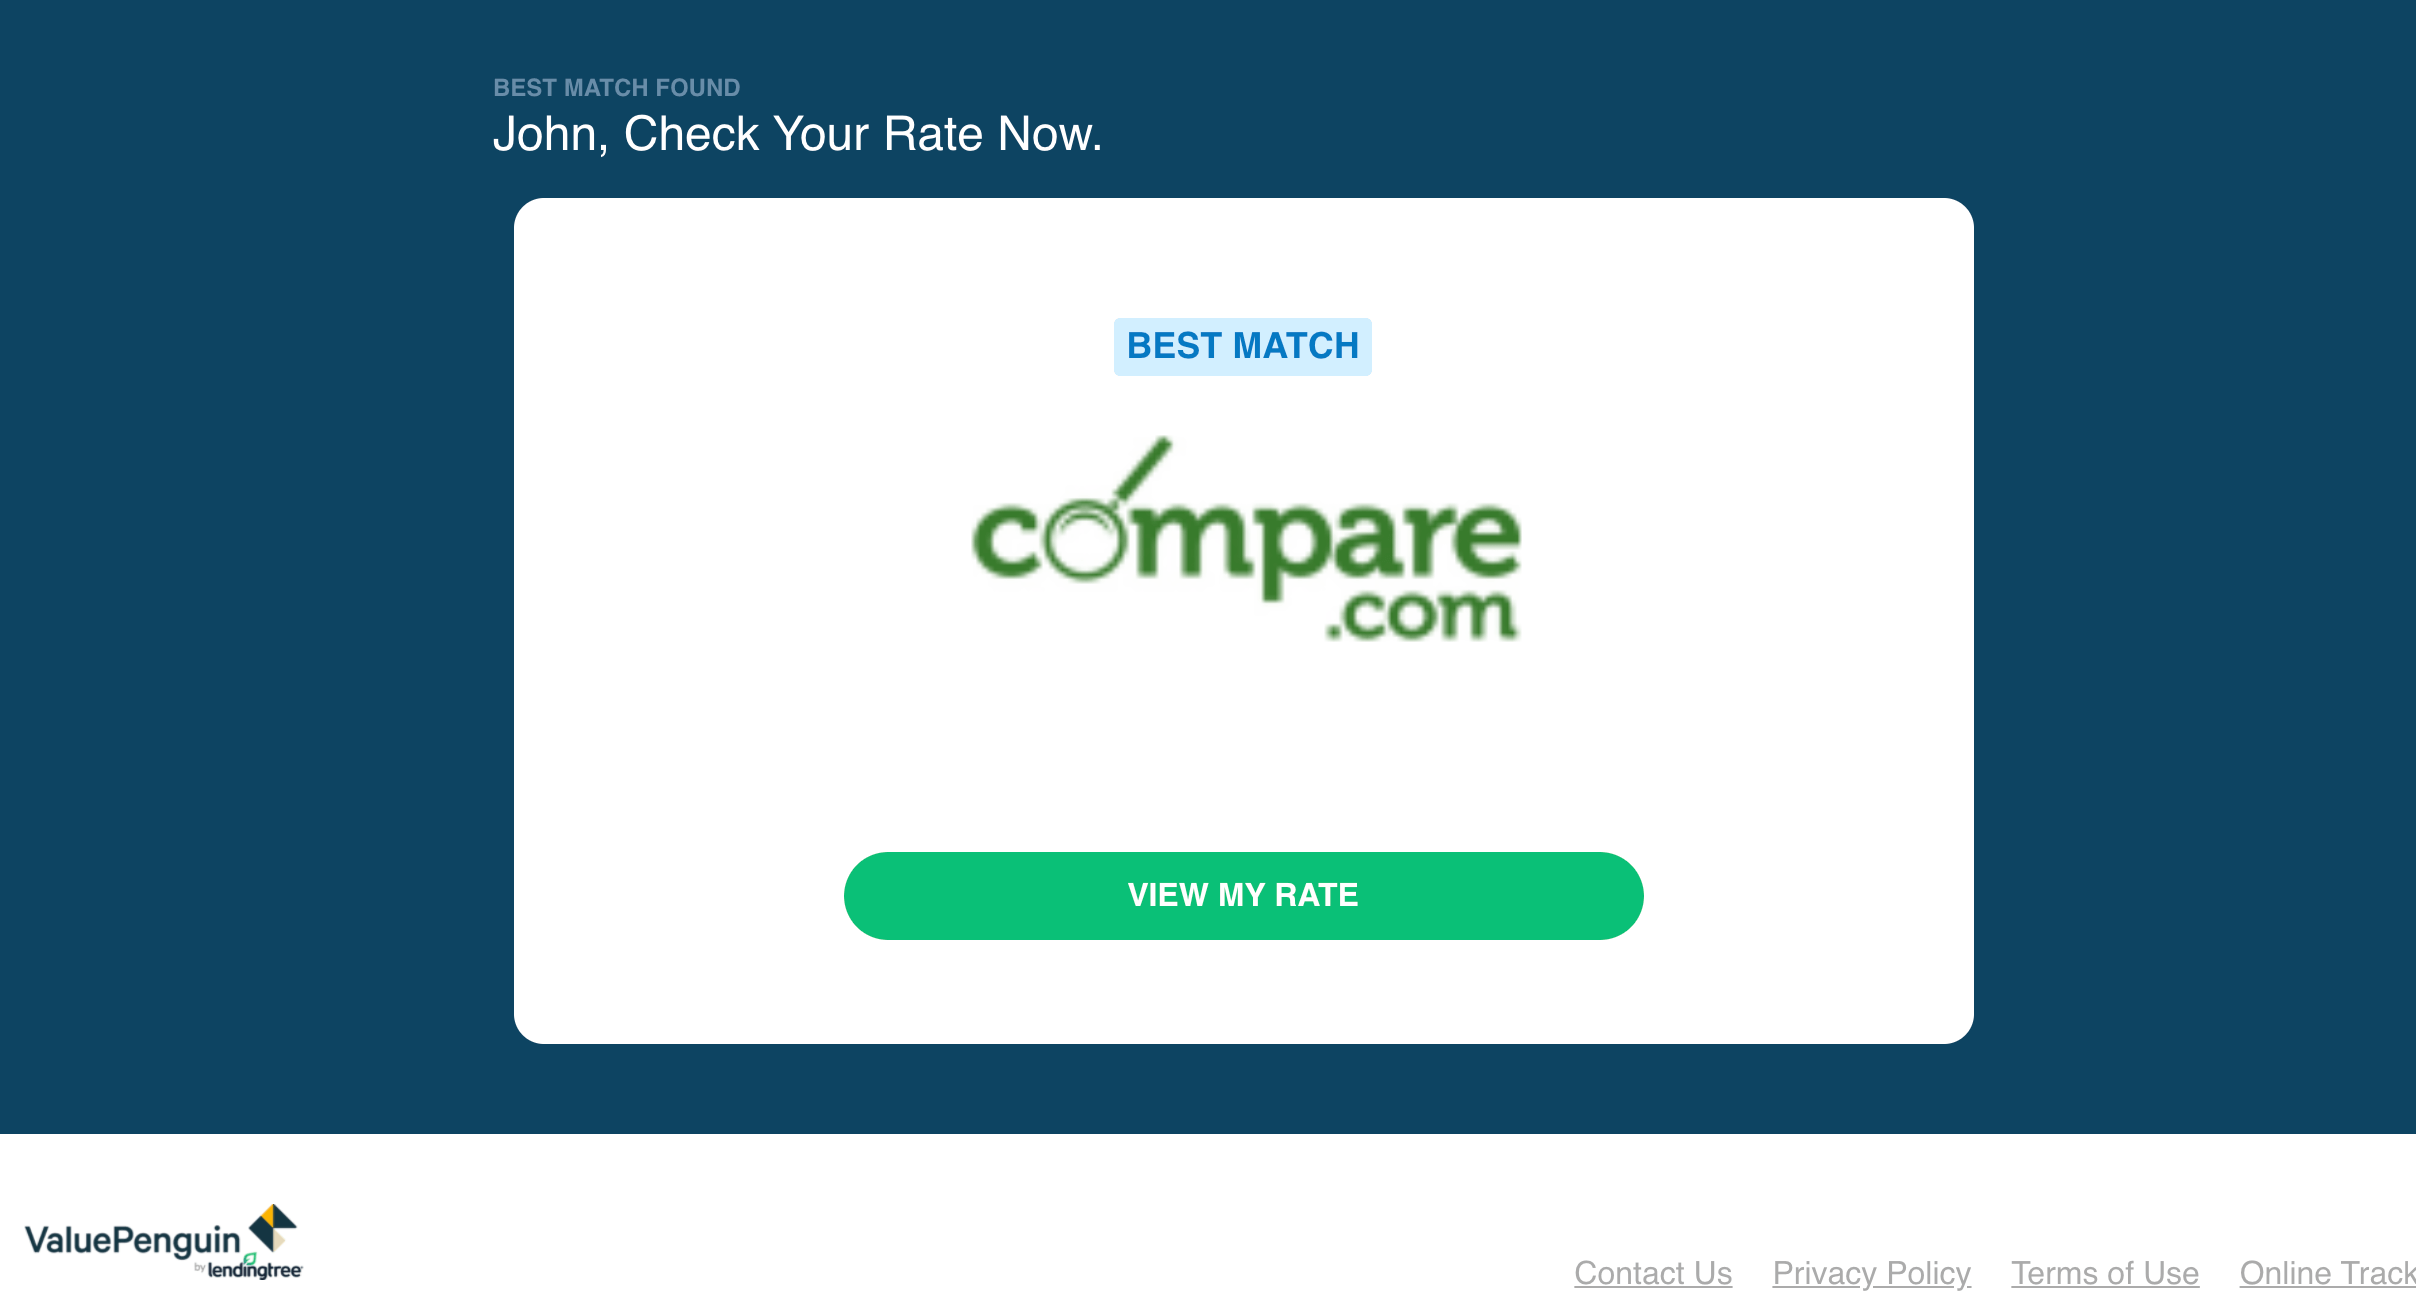 An advertisement for Compare.com on ValuePenguin